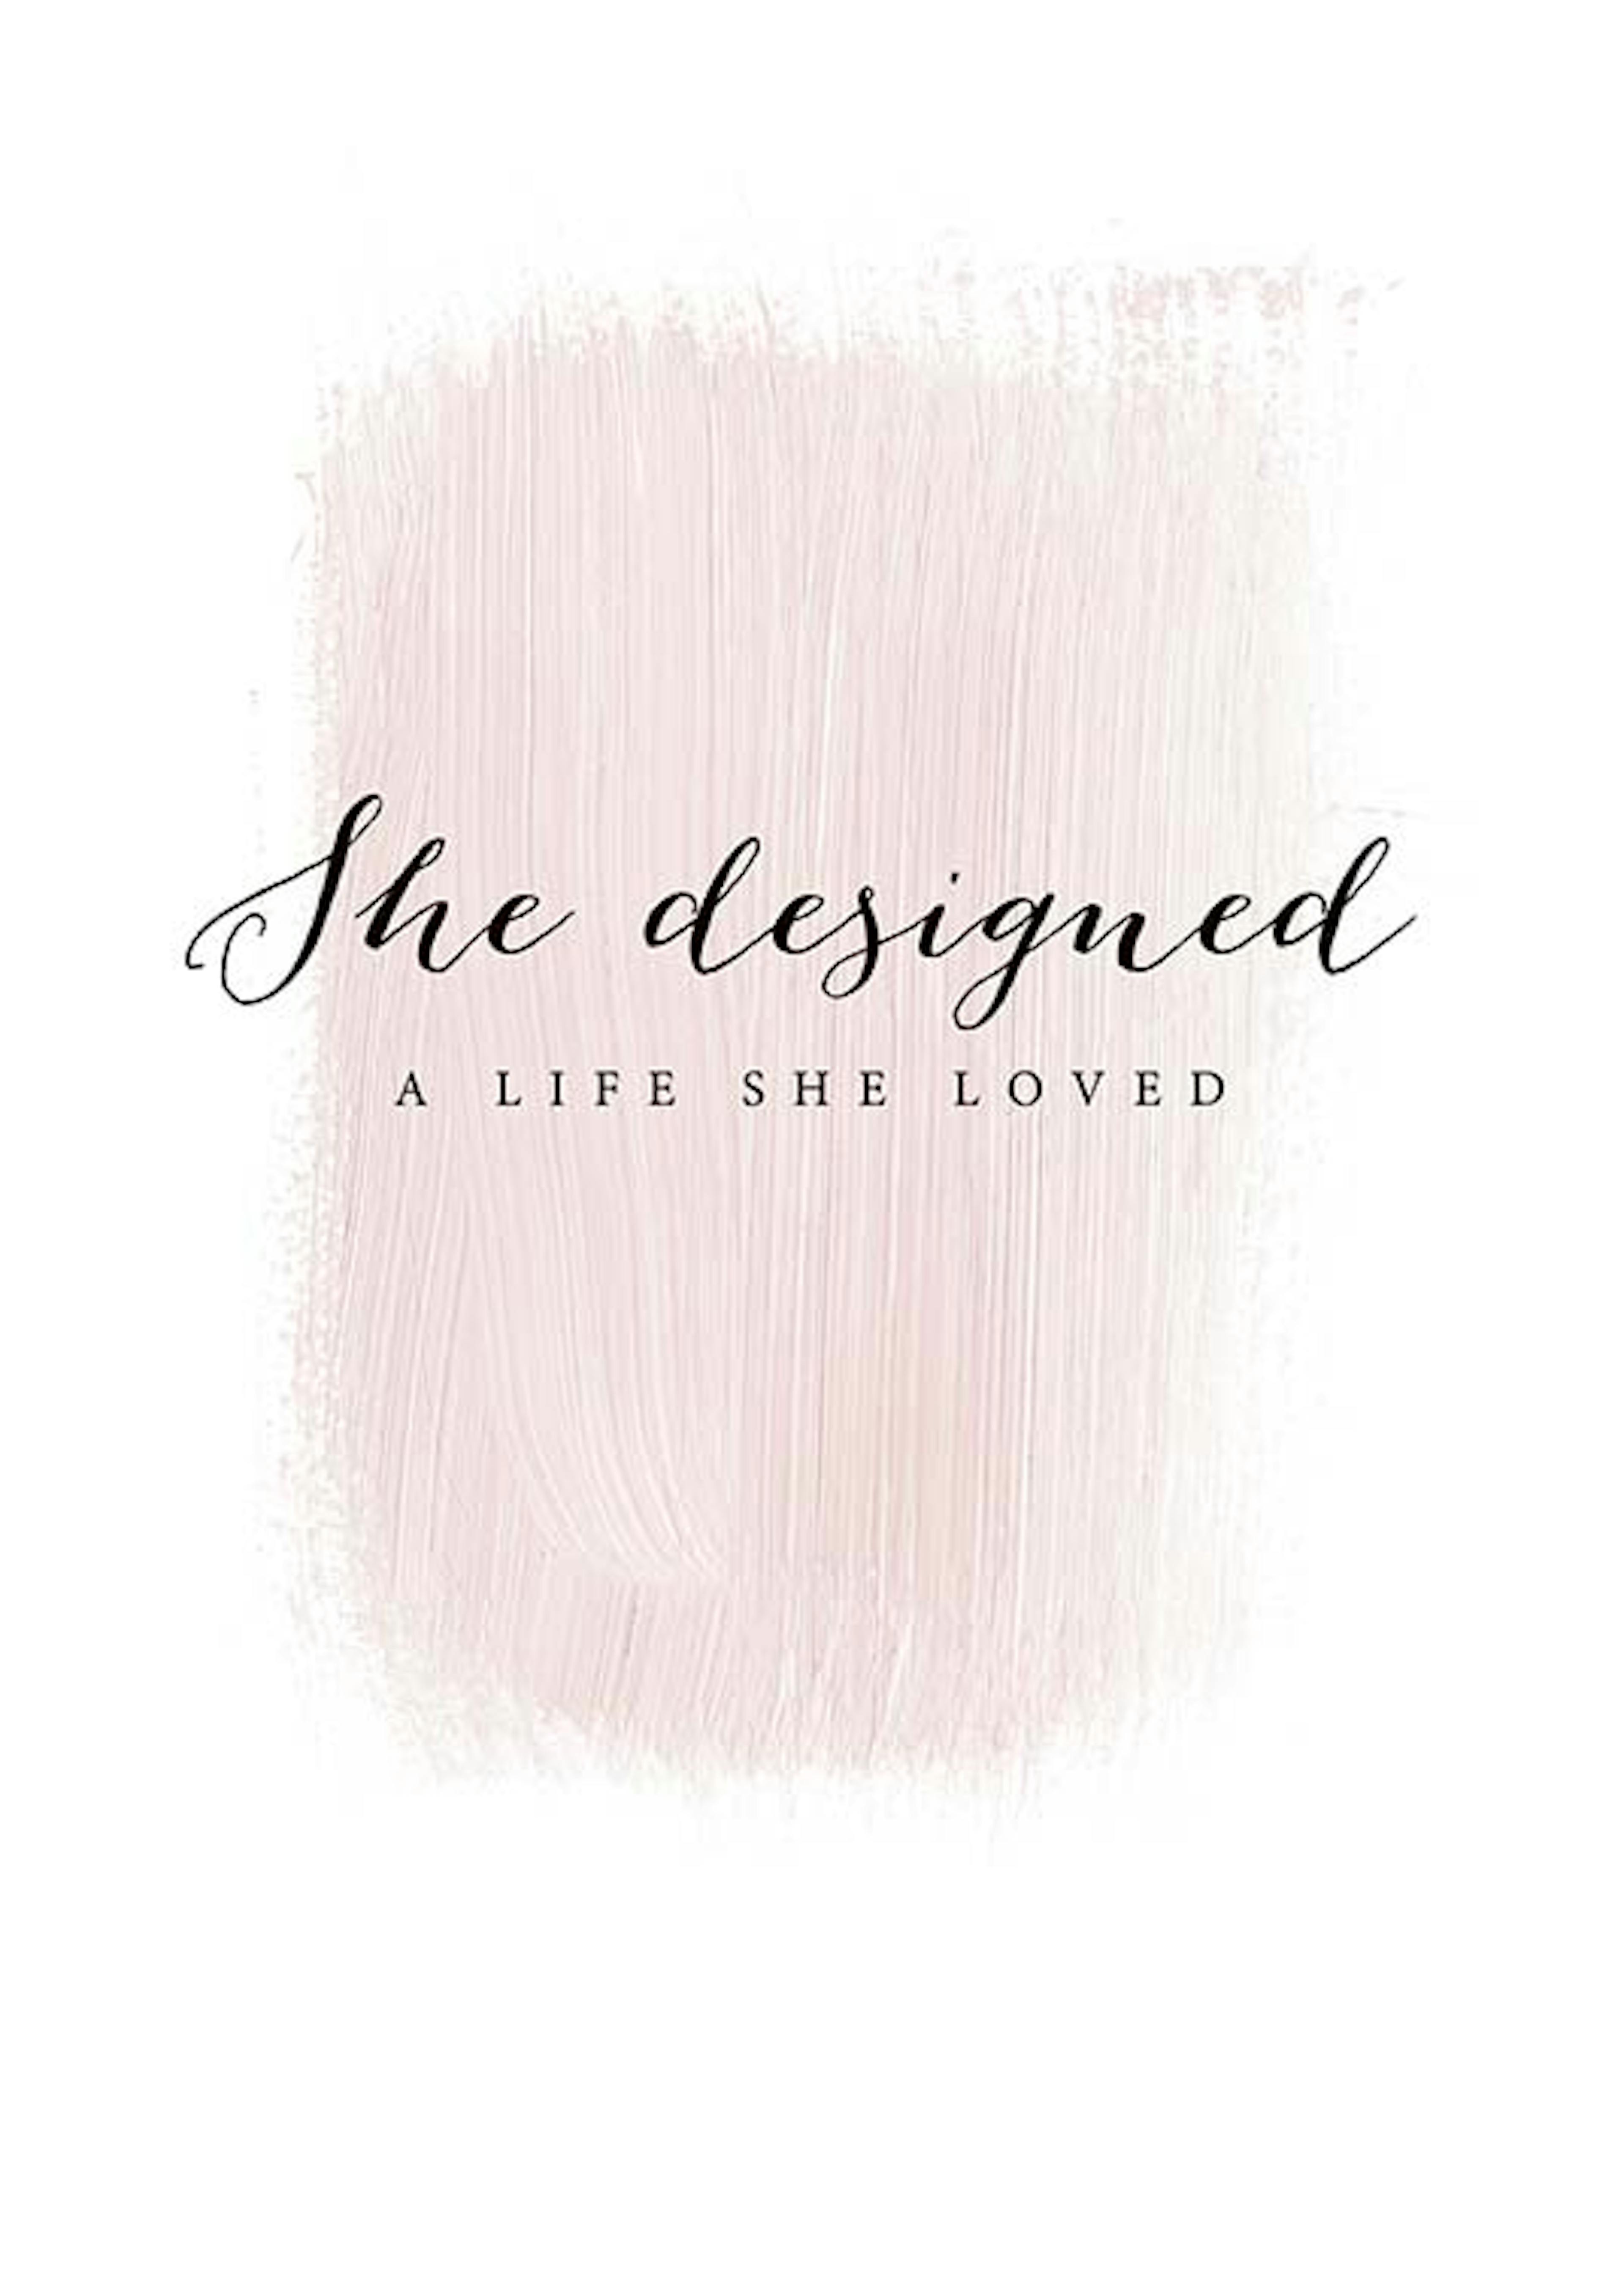 A Life She Loved Print